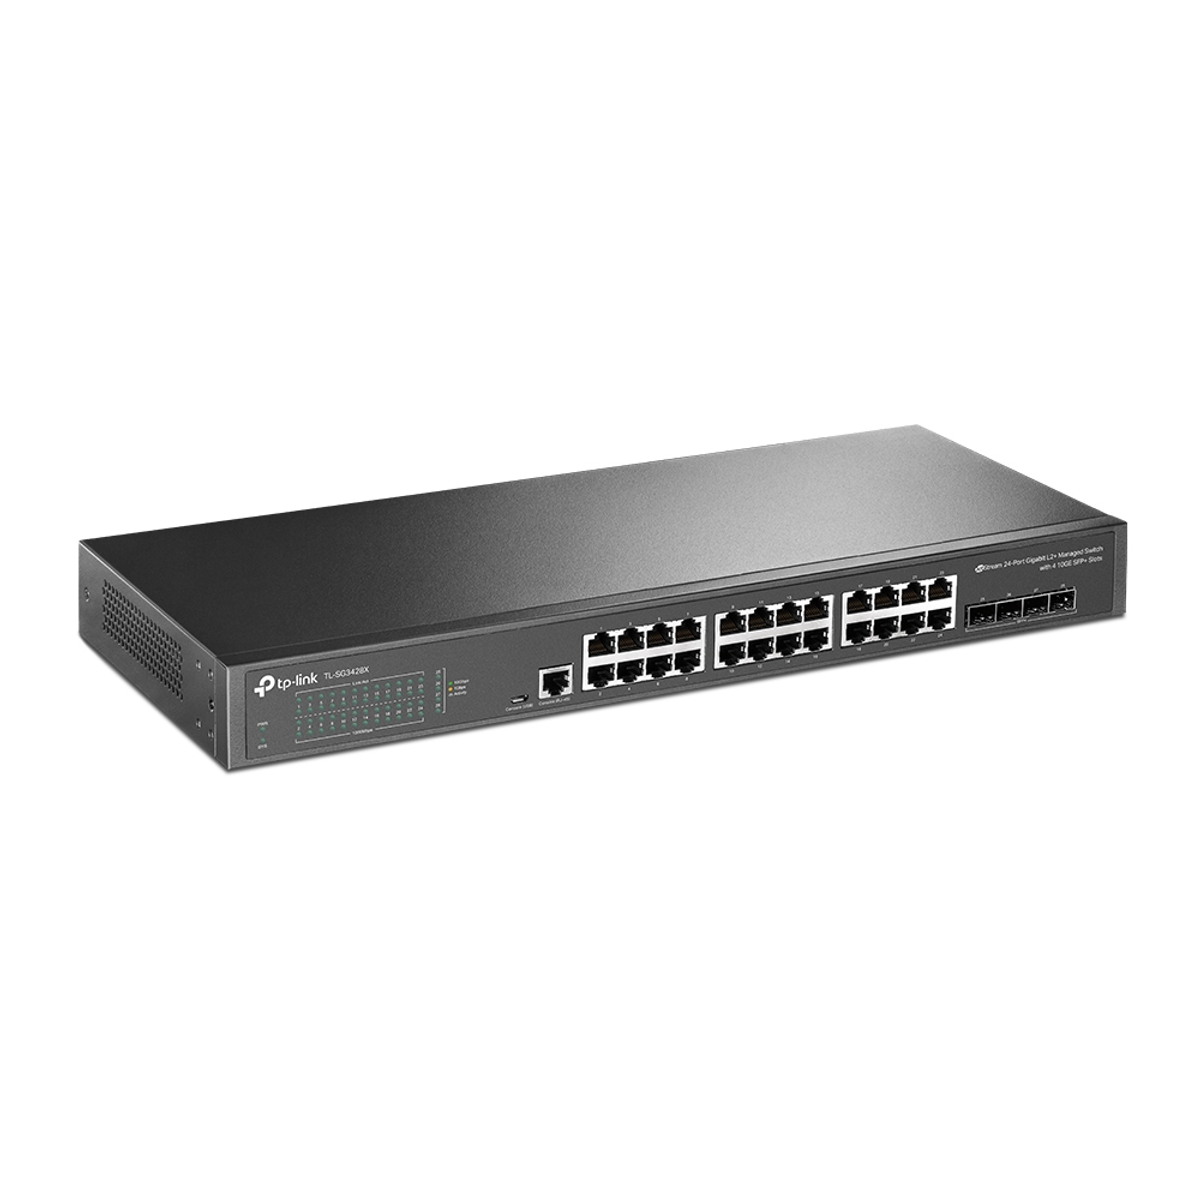 TL-SG3428X 28 Switch TP-LINK